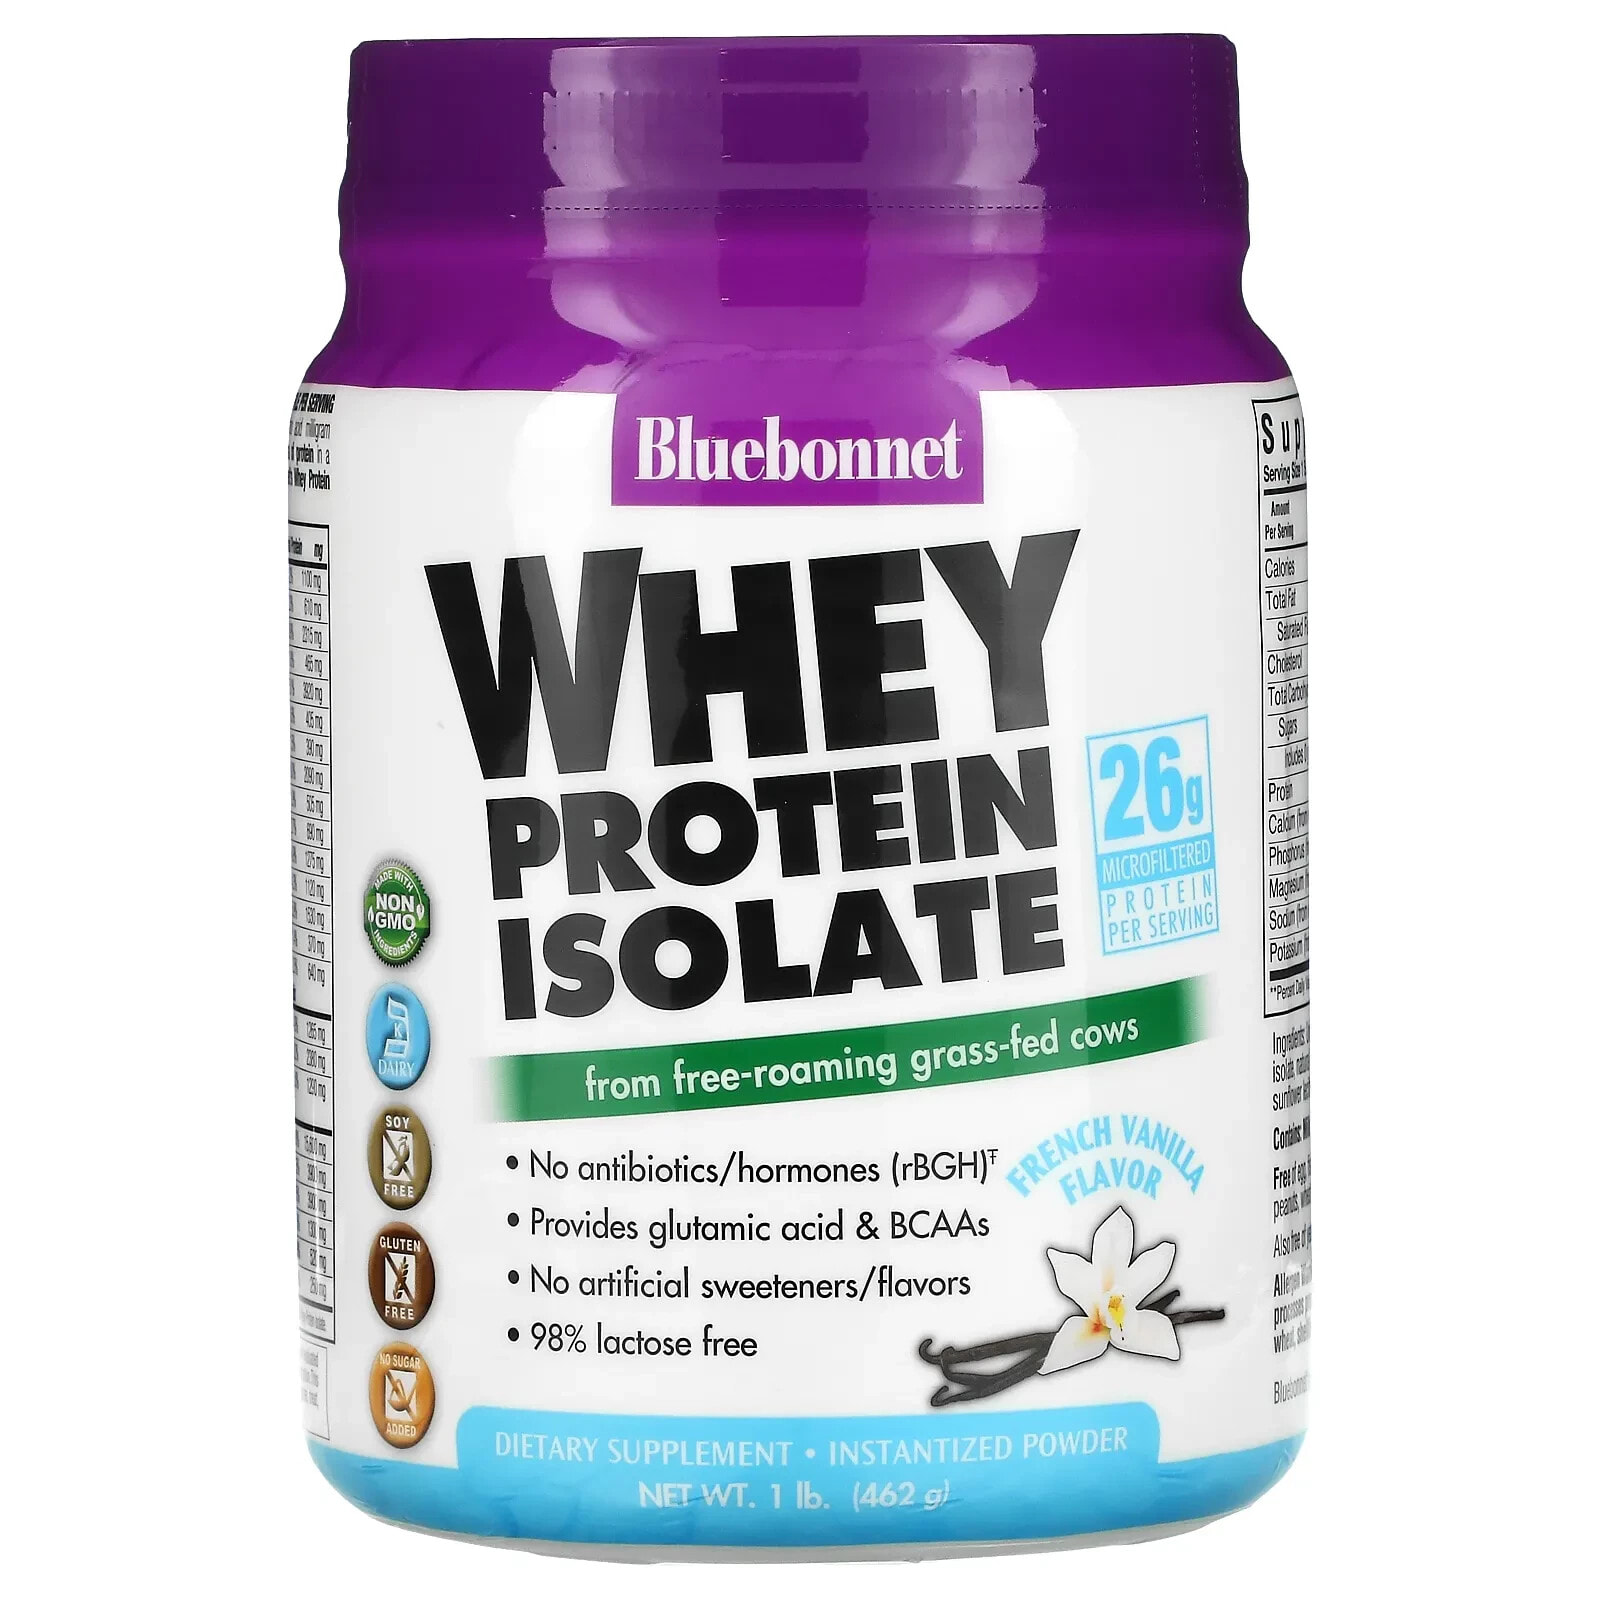 Whey Protein Isolate, French Vanilla, 2 lbs (924 g)